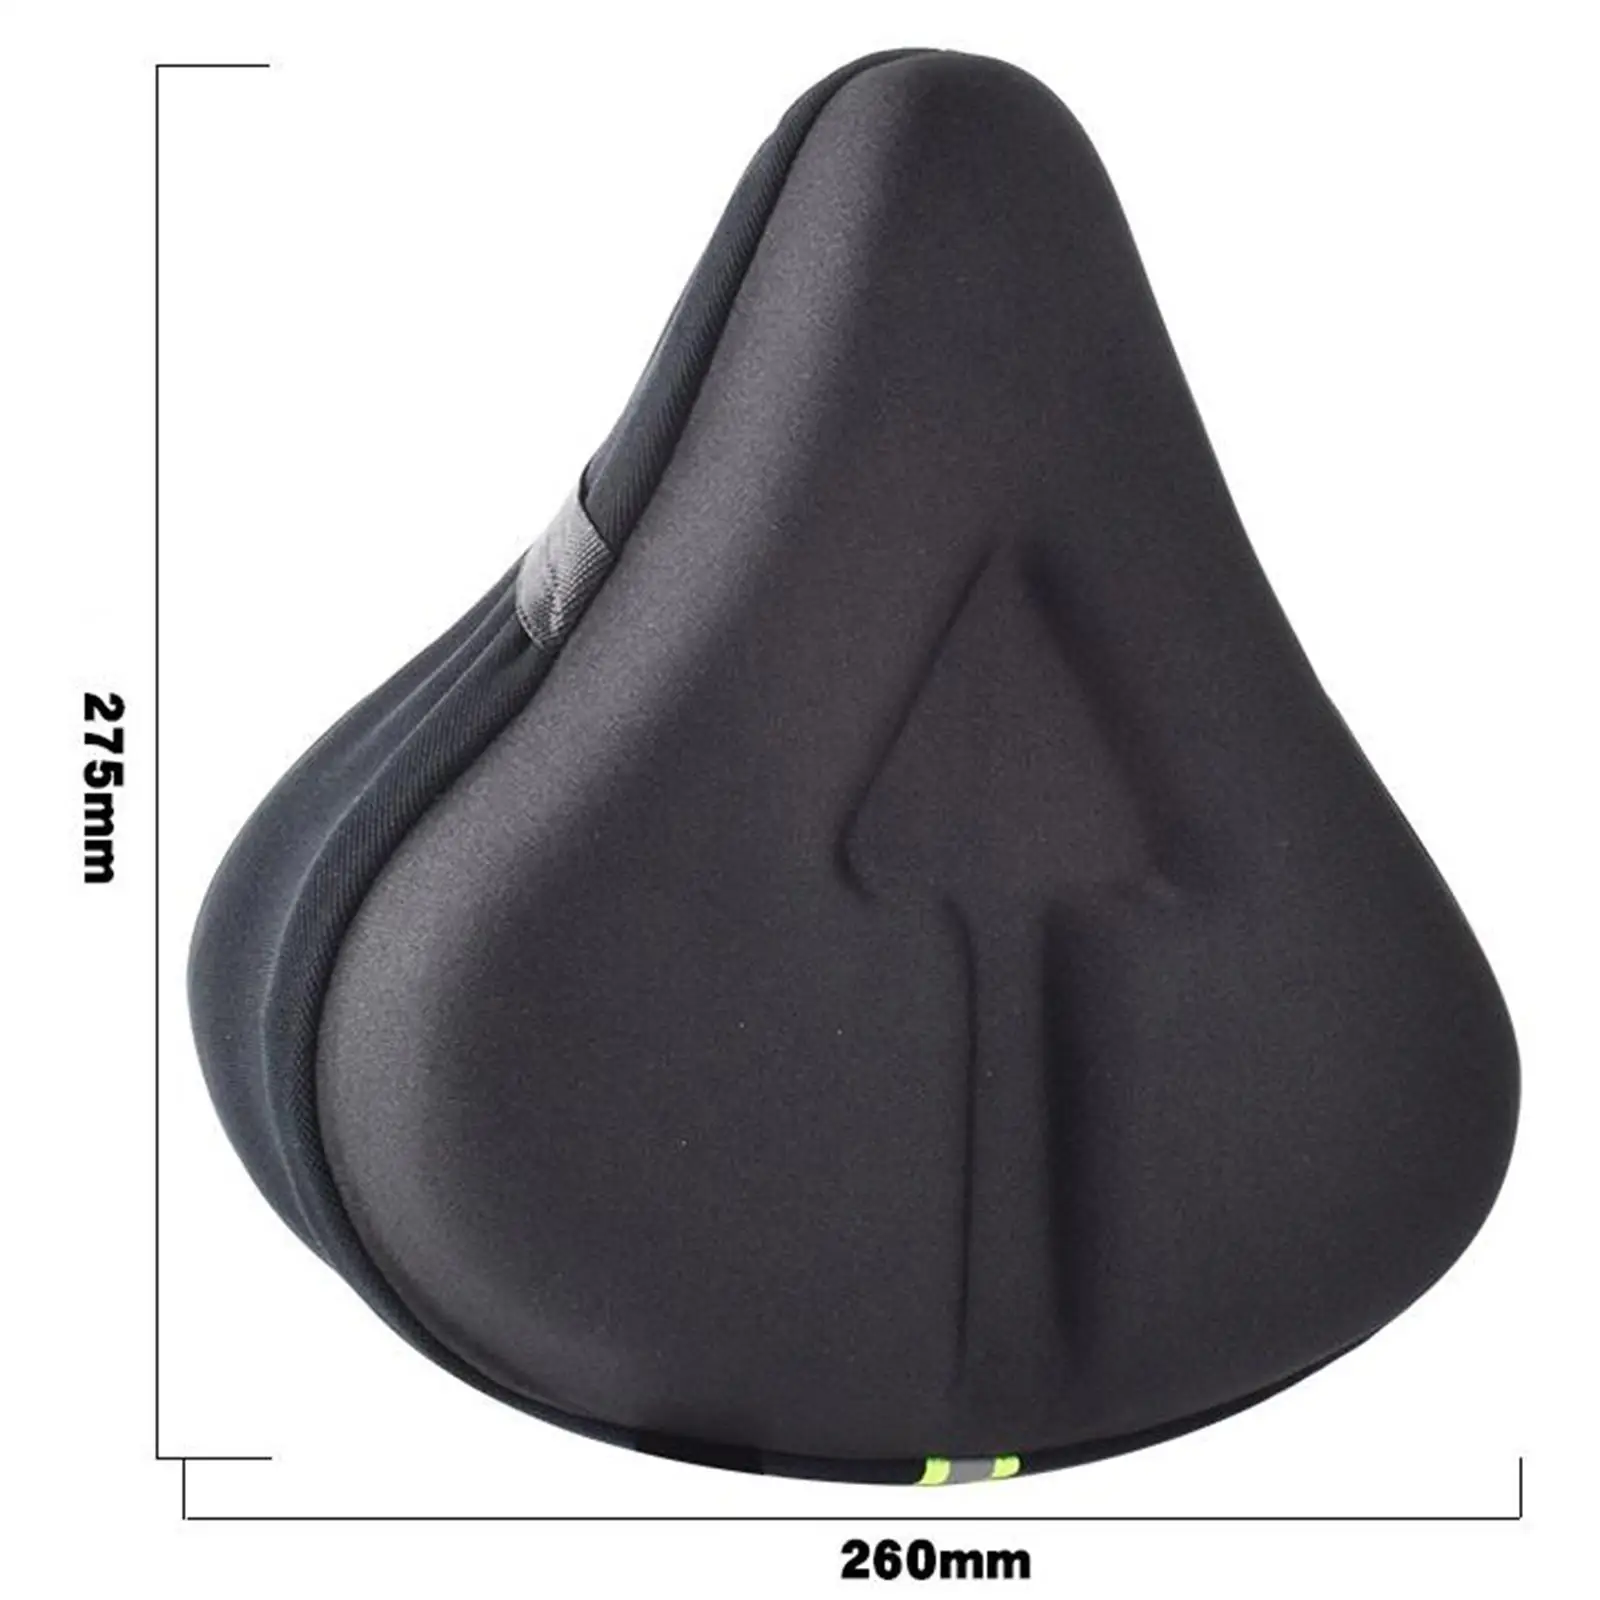 Wide Bike Seat Cushion Thicken Bike Seat Cover Comfortable for Exercise Bike Stationary Bikes Road Bicycle Cycling Seats